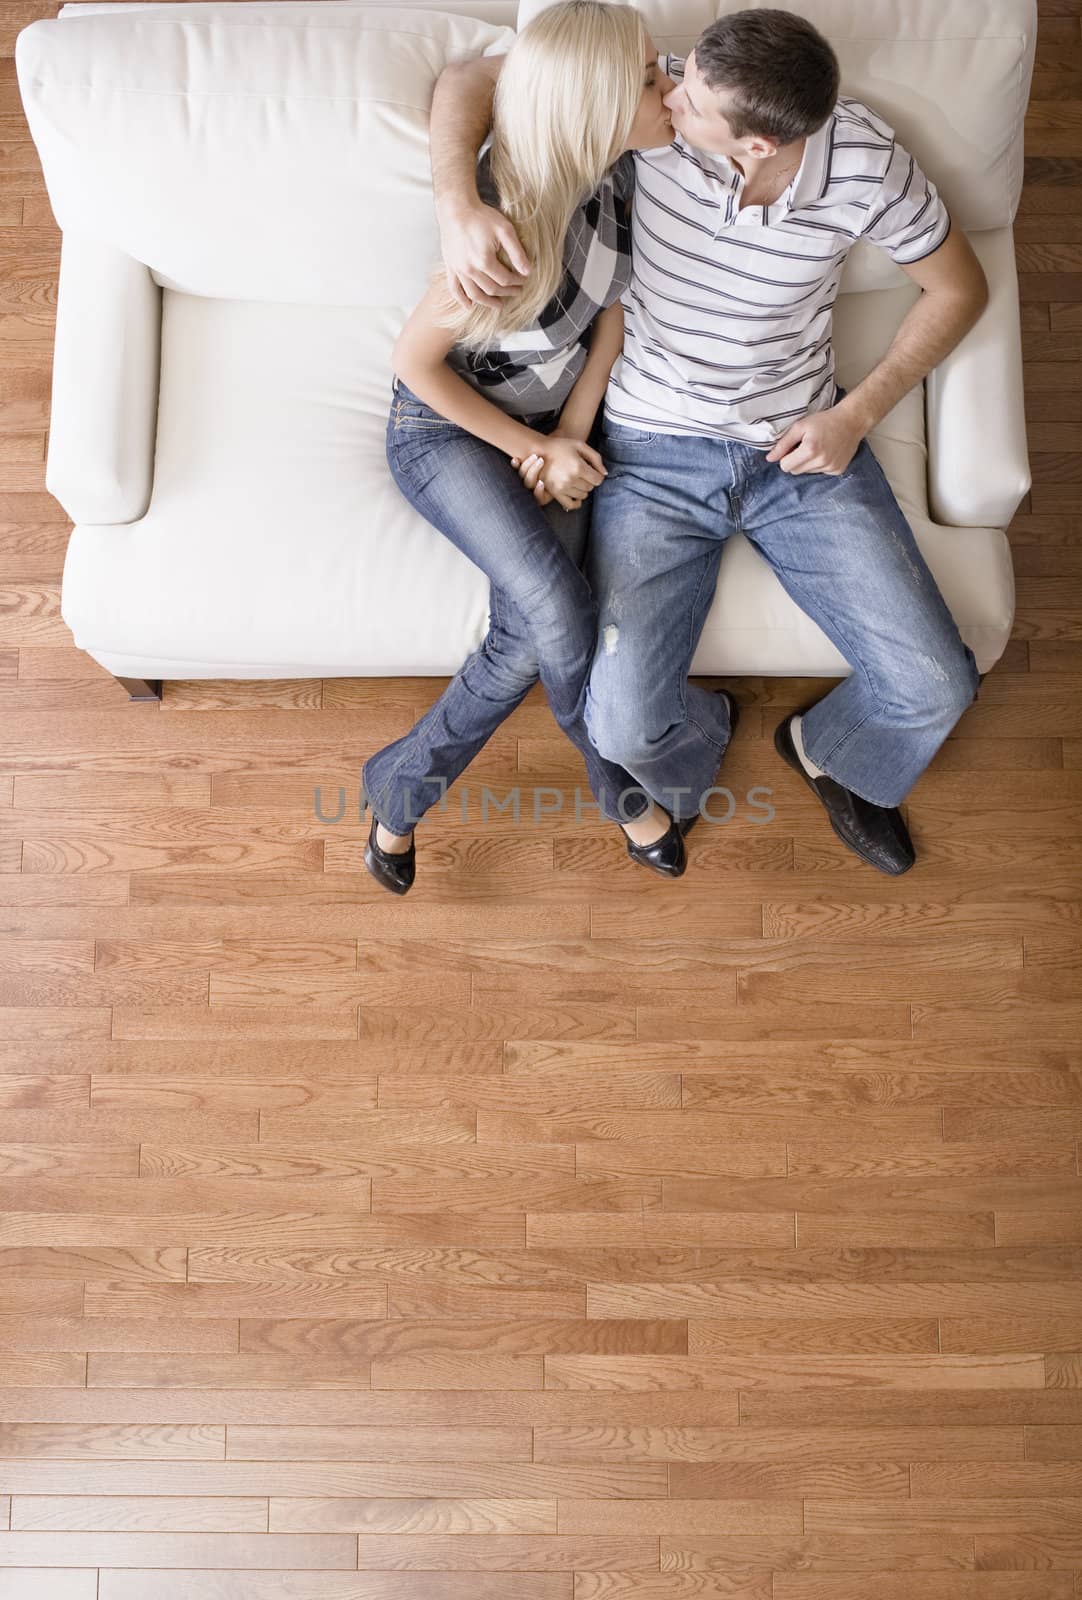 Young couple sitting on a cream colored love seat and kissing. Vertical shot